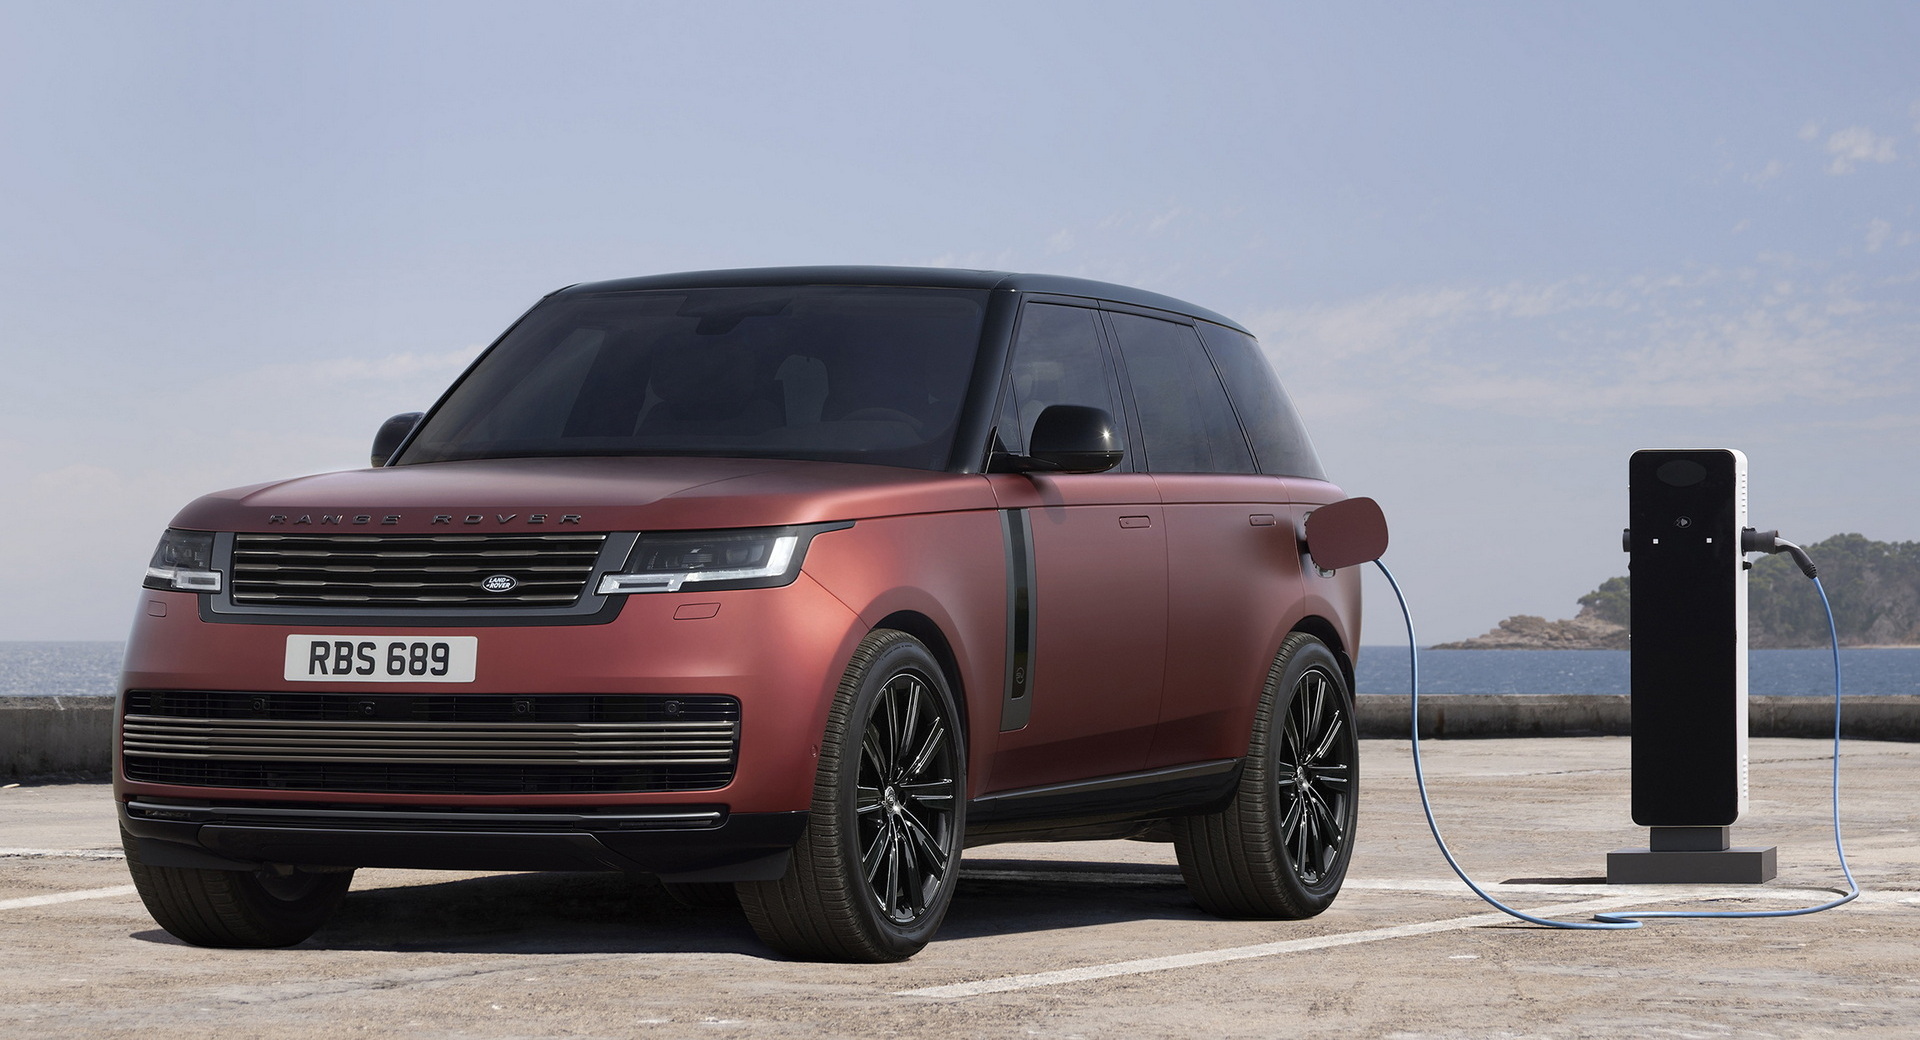 Land Rover Exceeds Own Expectations With Range Rover PHEV